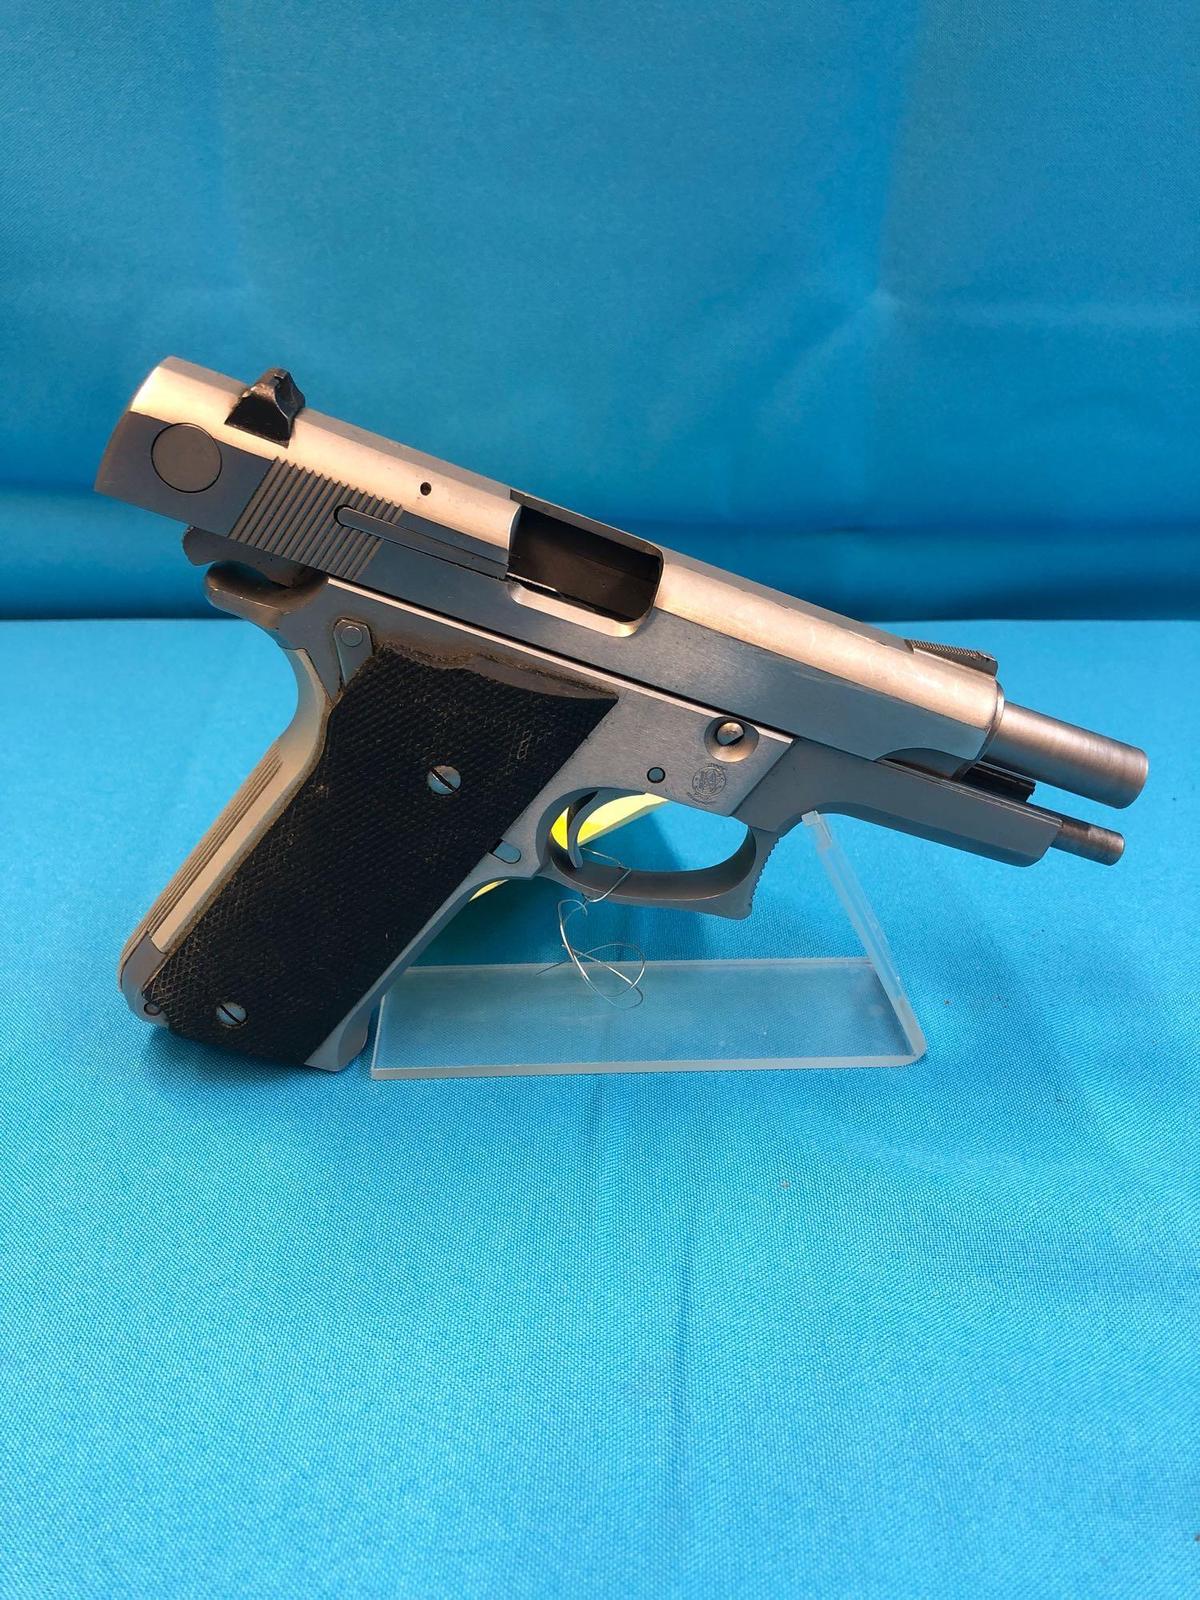 Smith & Wesson 659 9mm pistol TAA1558